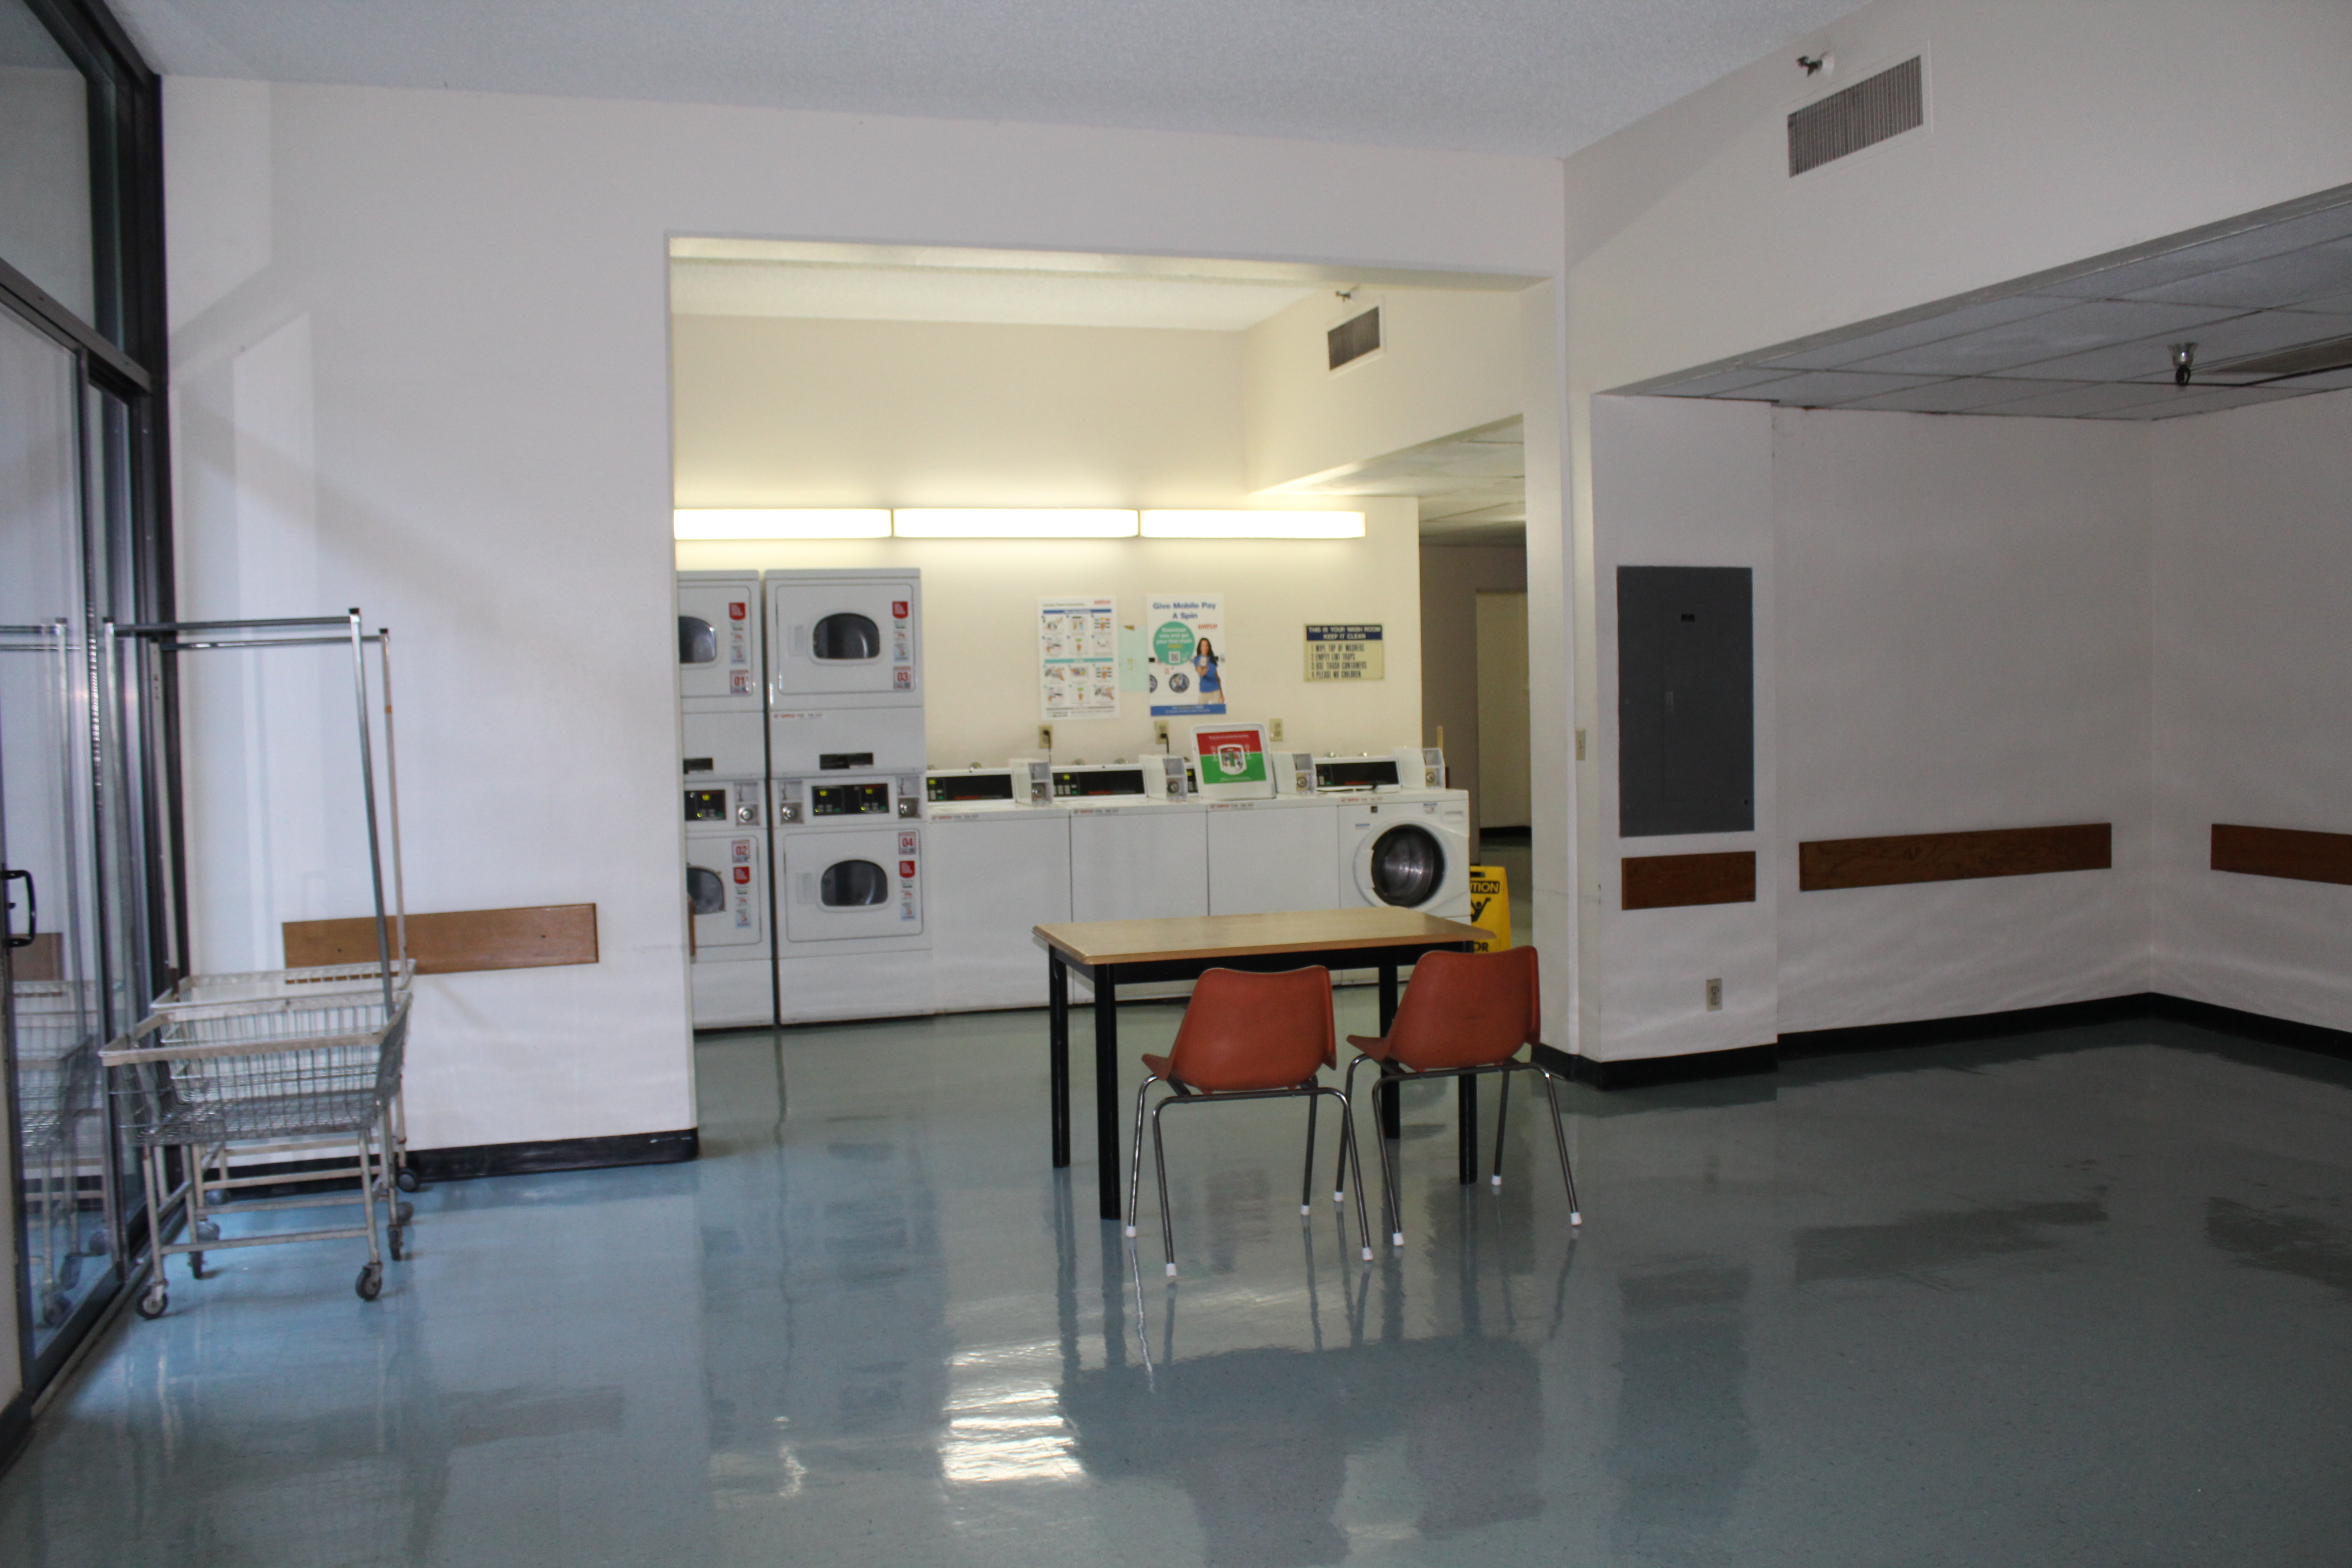 Interior view of a laundry room for Angelus Plaza 1. Large comparmental area with washers and dryers, wire rolling basket and a table with two chairs. White walls with a brown boarder.